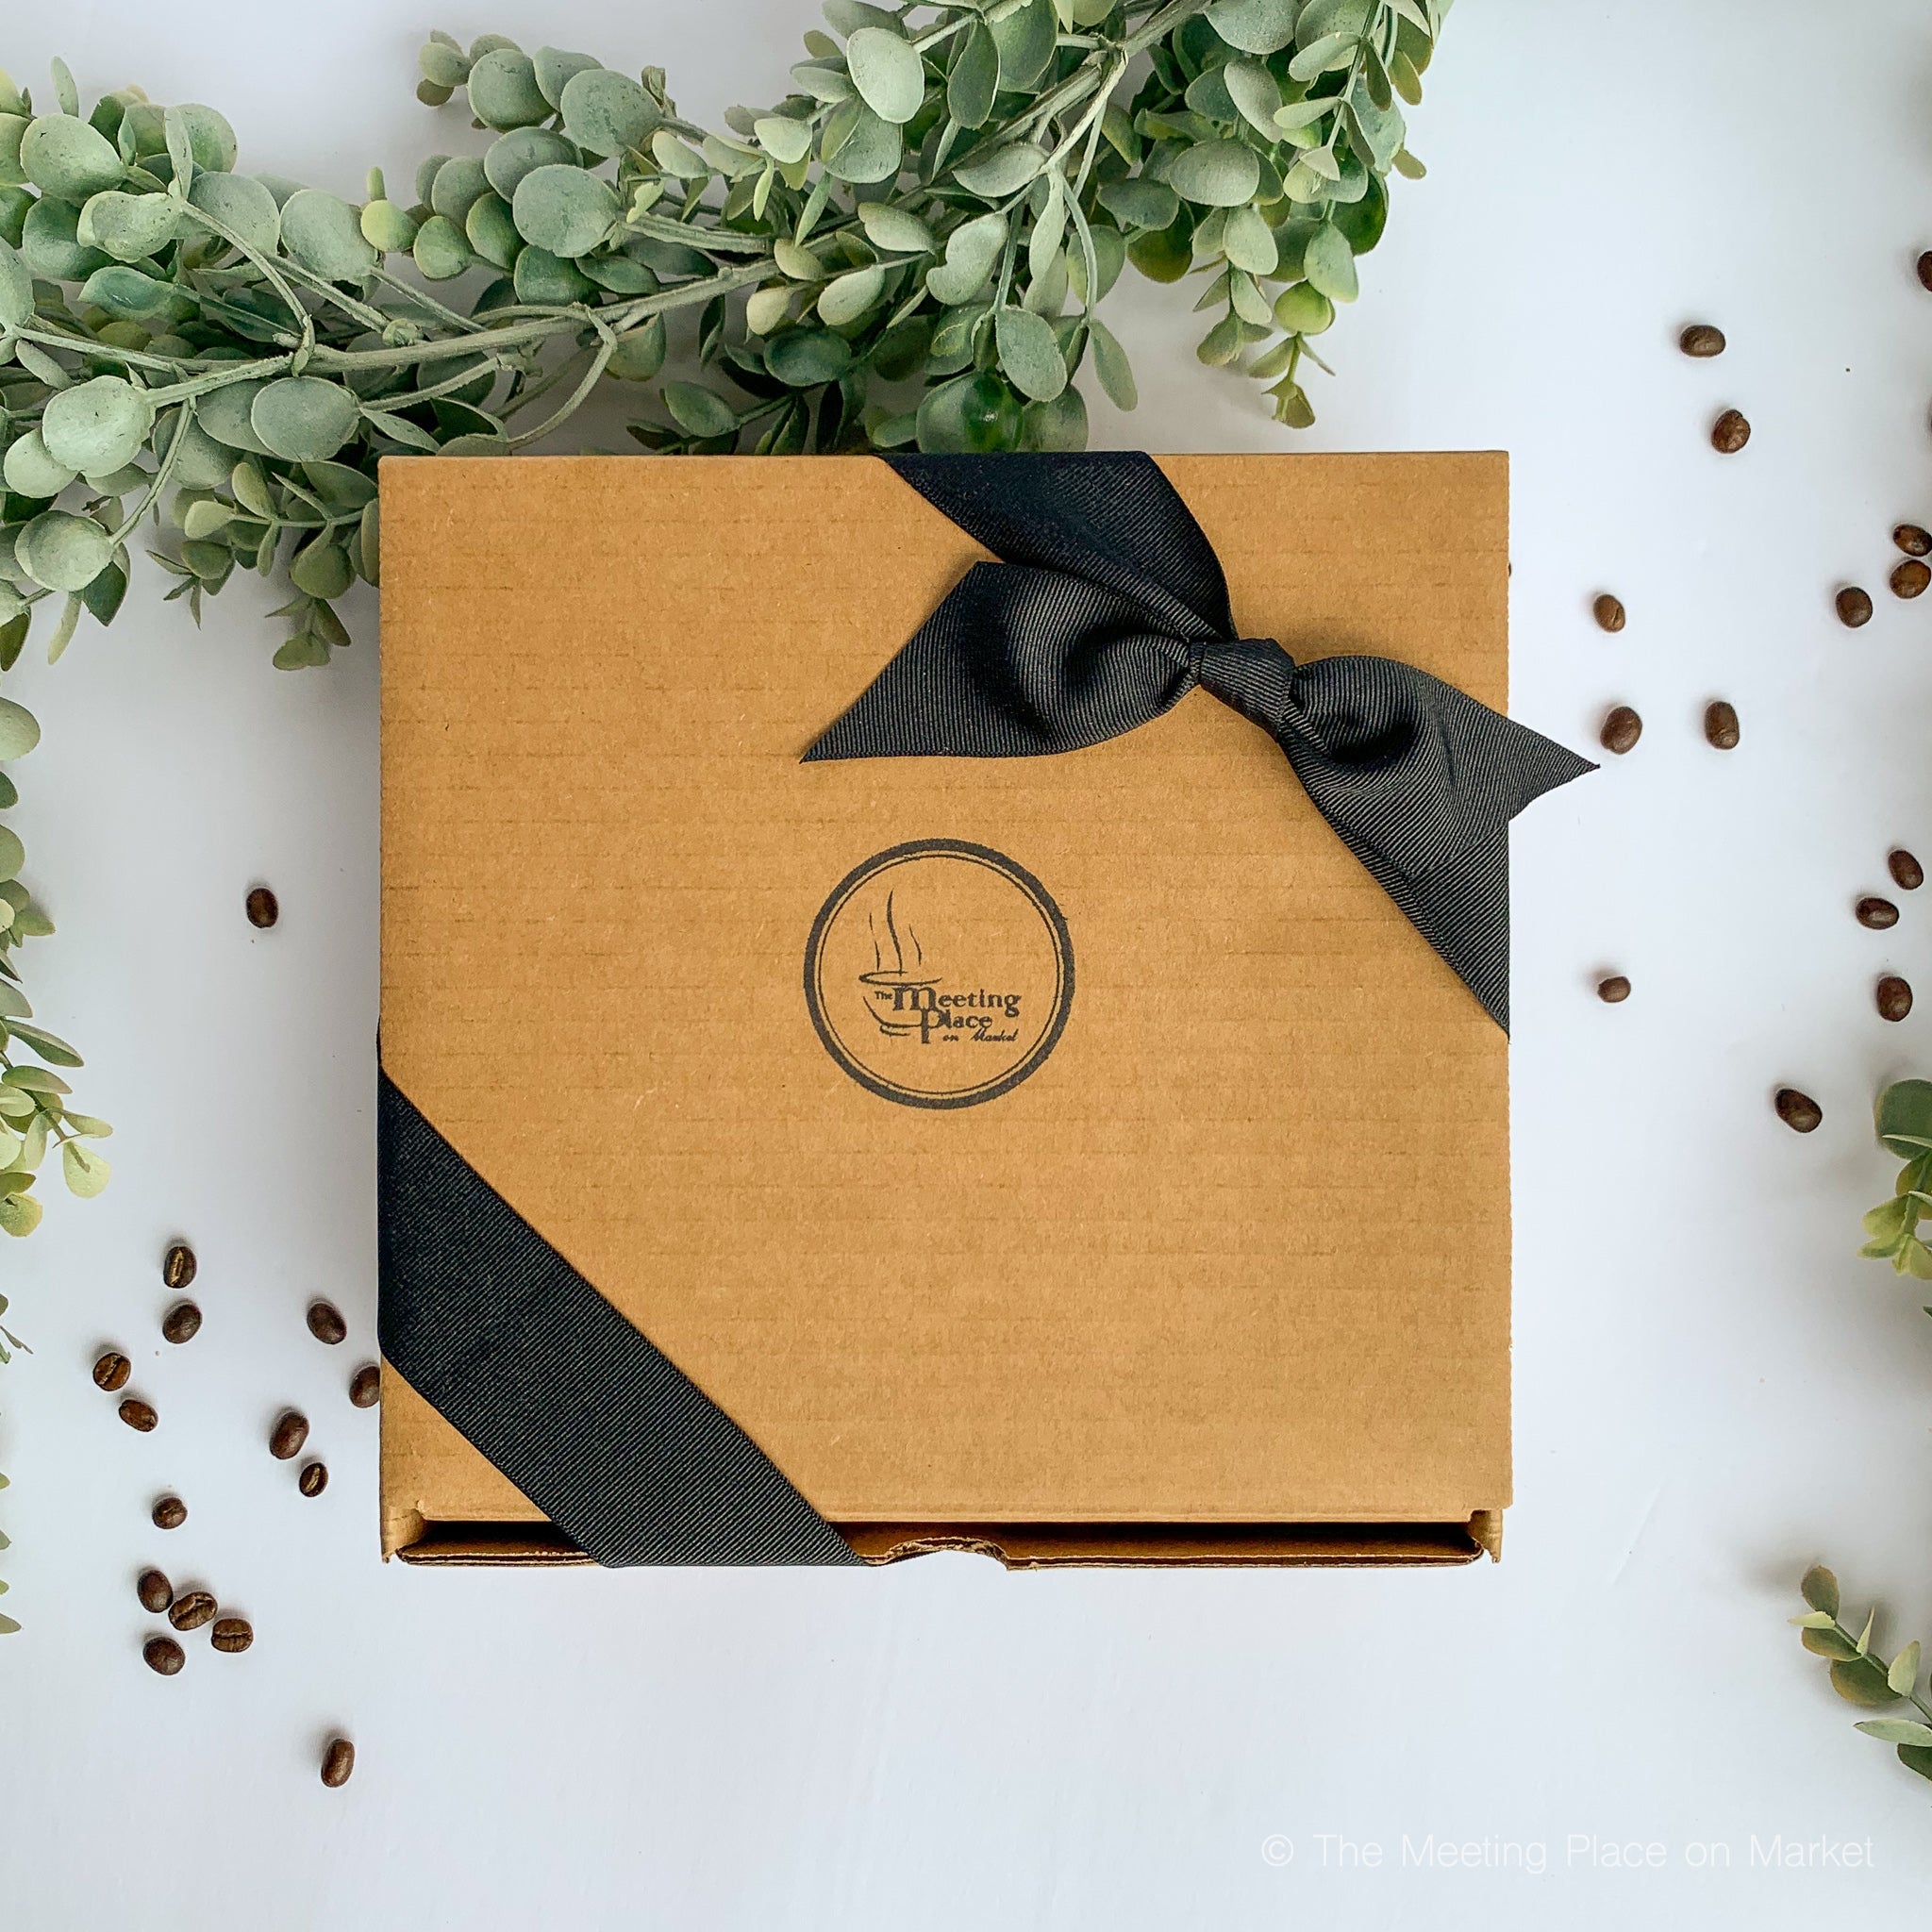 Mystery Gift Box, Choice of Gourmet Coffee or Tea, Surprise Gift Value of $45+ Sampler Gifts - The Meeting Place on Market